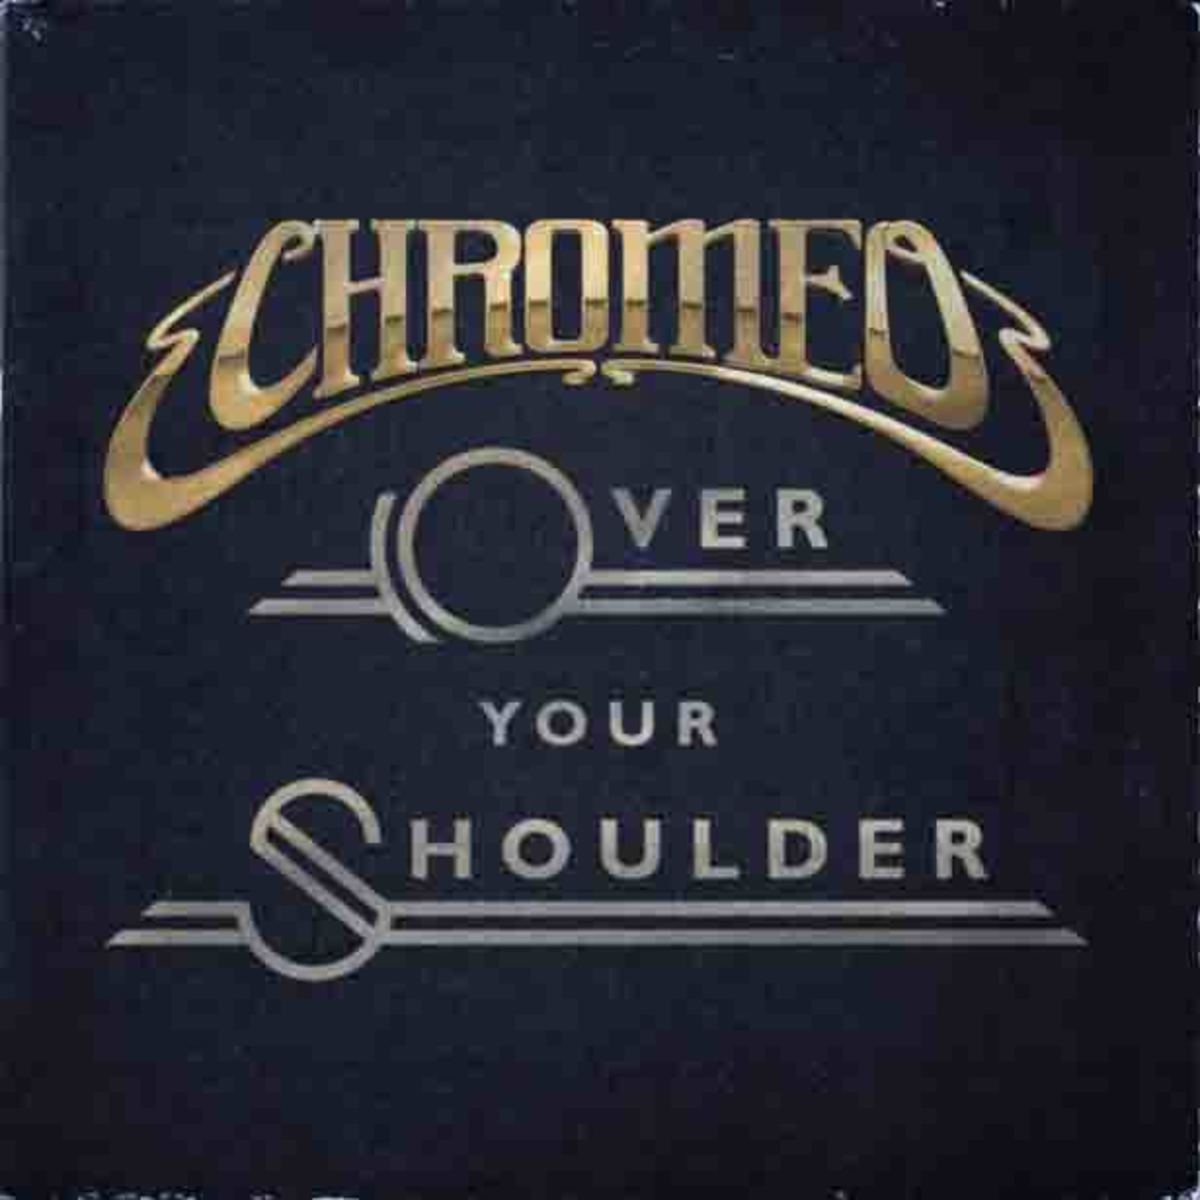 EDM News: Chromeo Debuts New Full Song "Over Your Shoulder" On Soundcloud